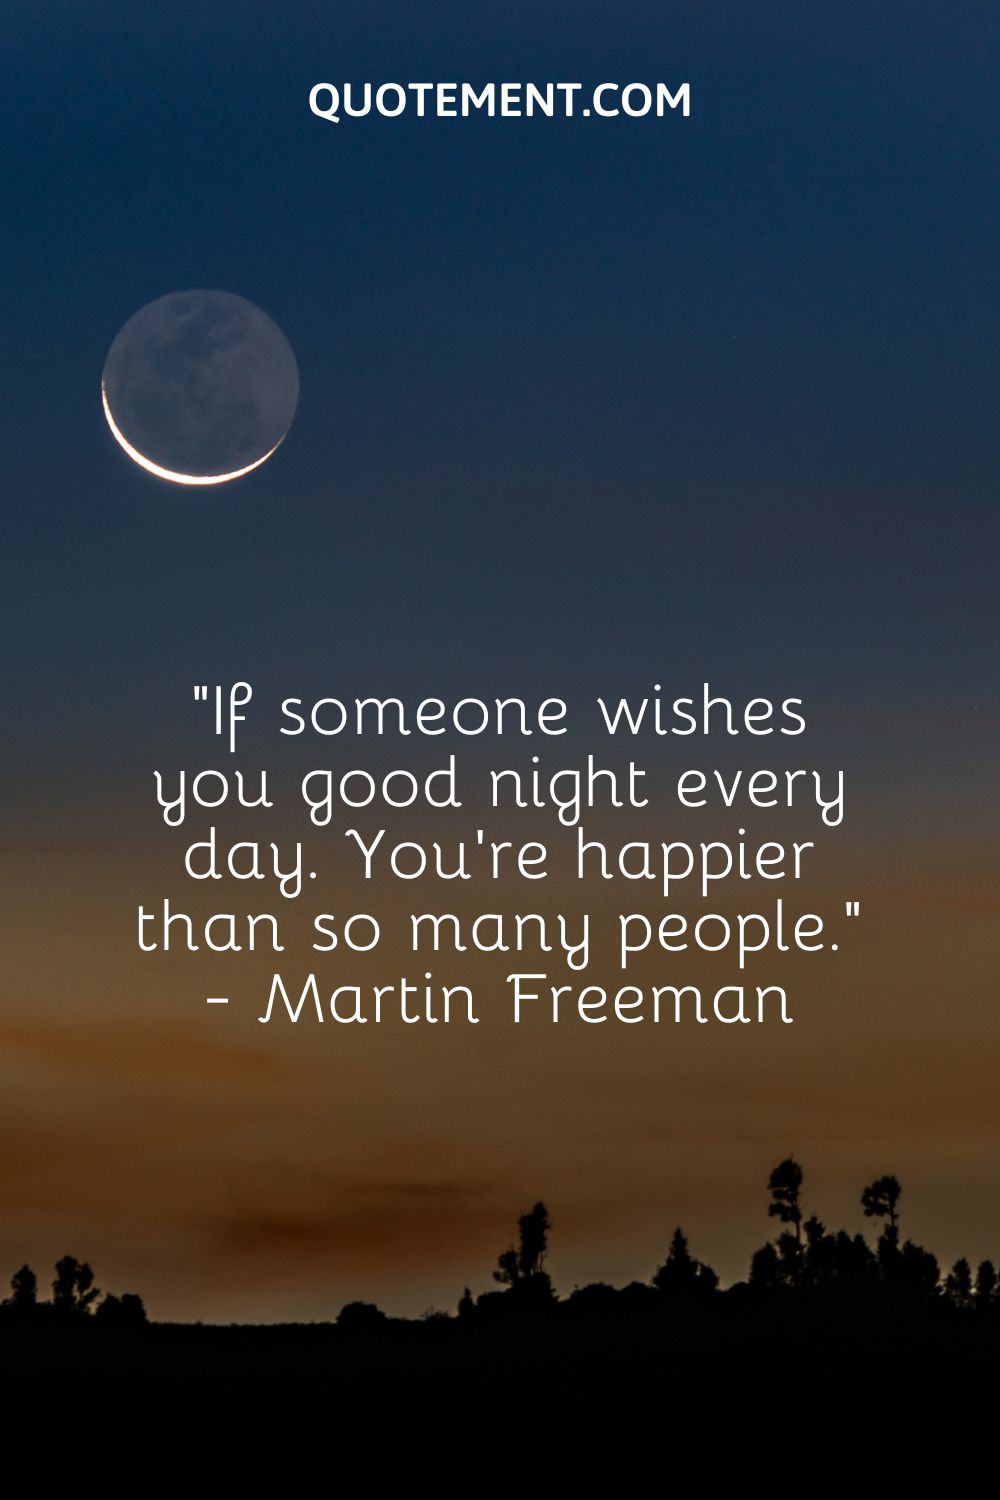 If someone wishes you good night every day.